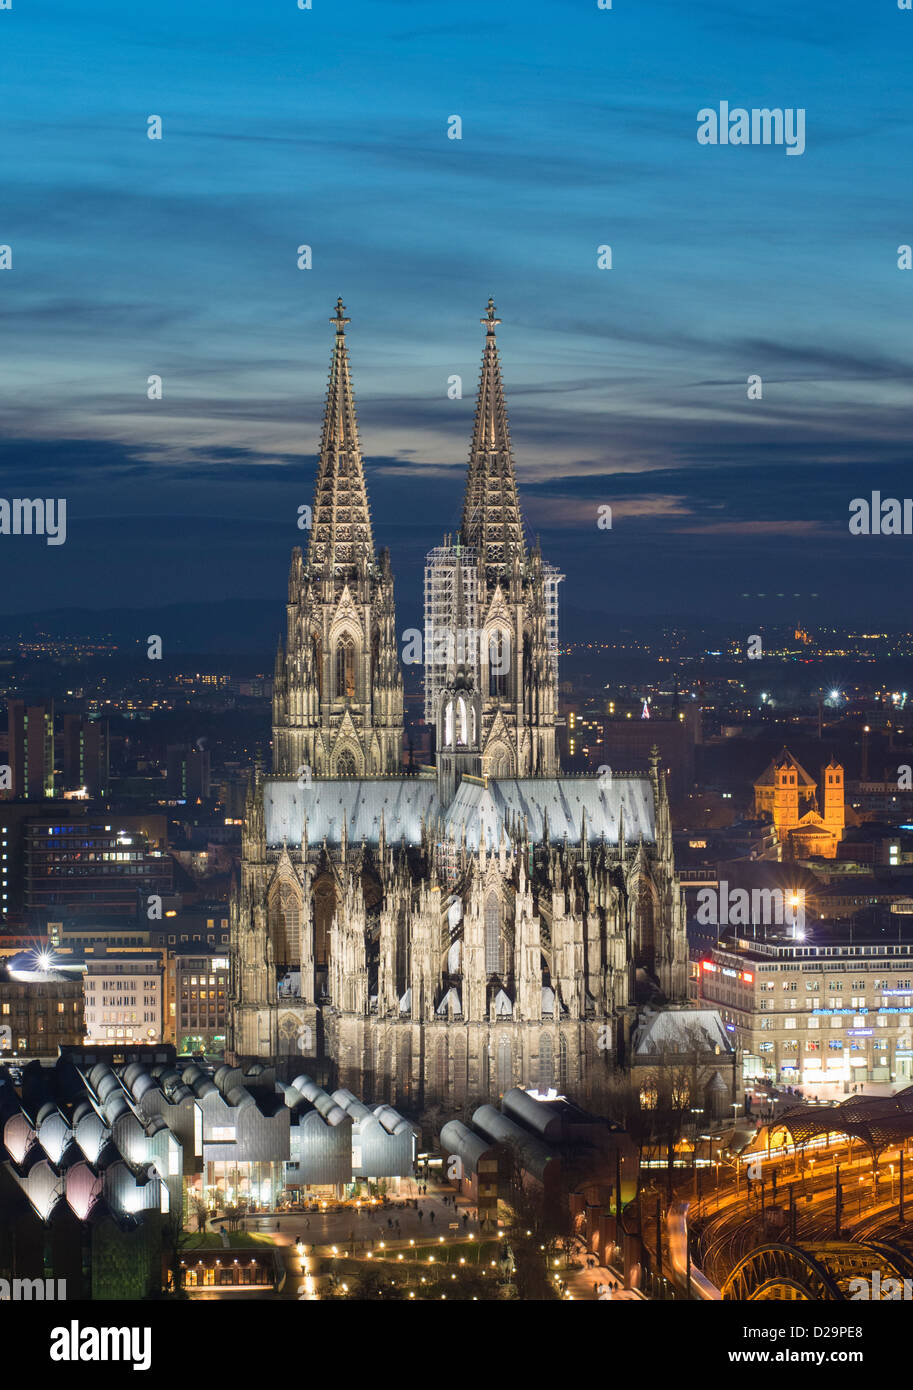 Evening view of skyline of Cologne, Germany with floodlit Cologne Cathedral prominent Stock Photo